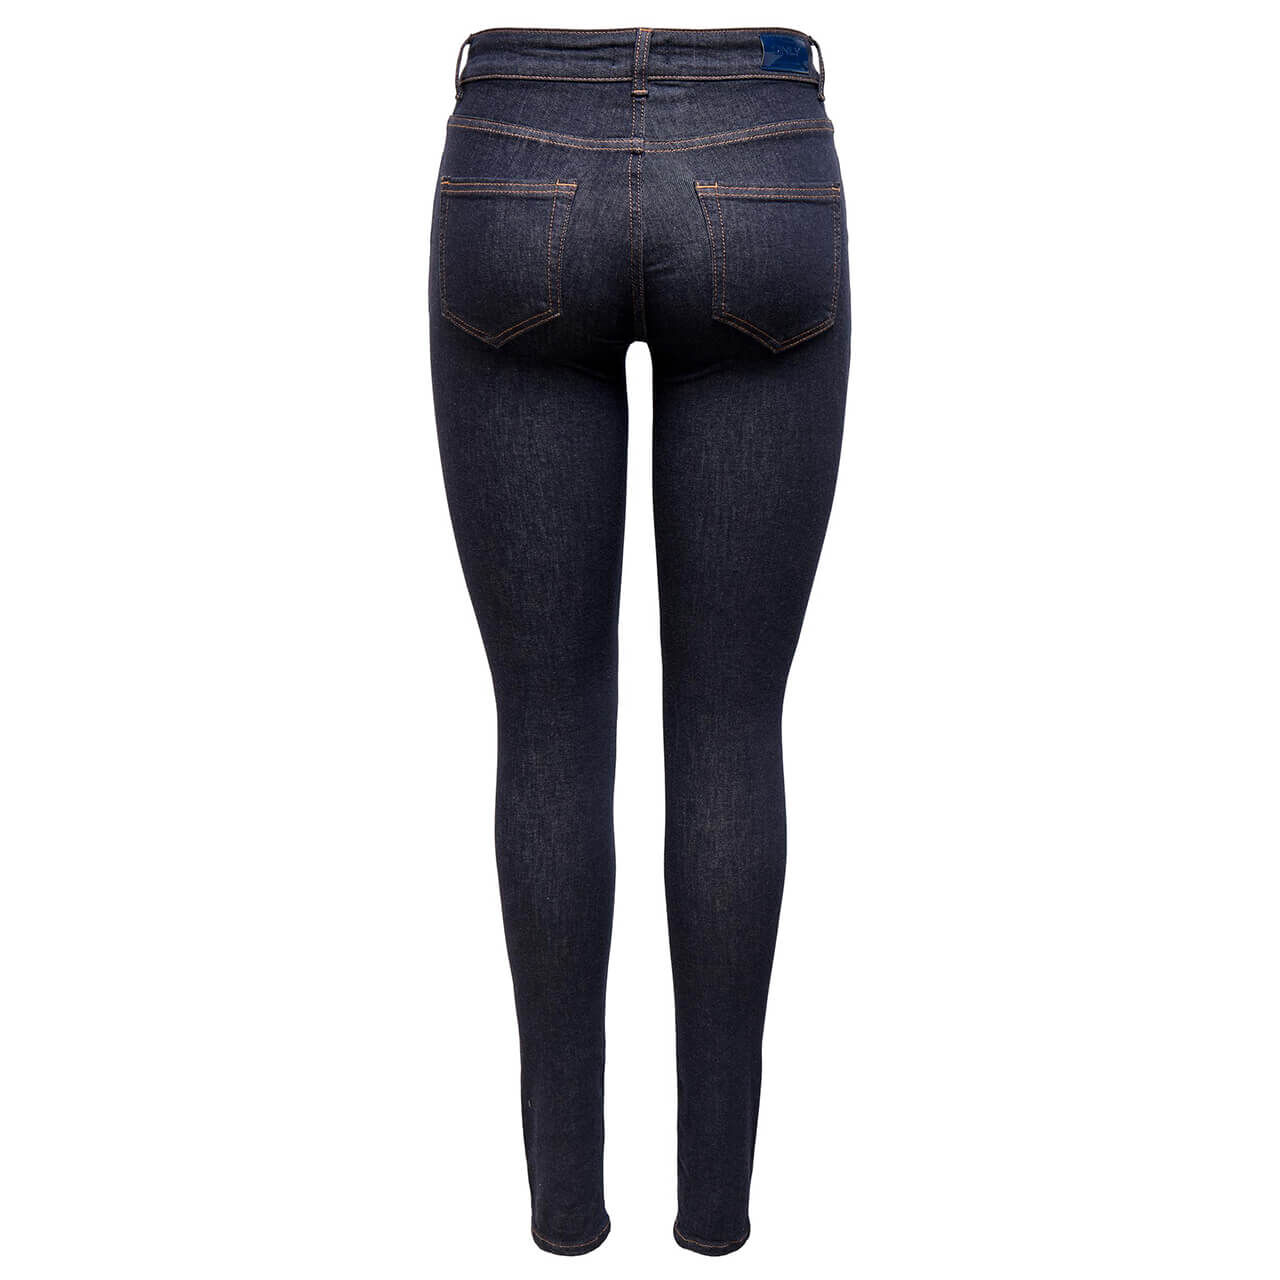 Only Blush Ankle Skinny Jeans blueish black